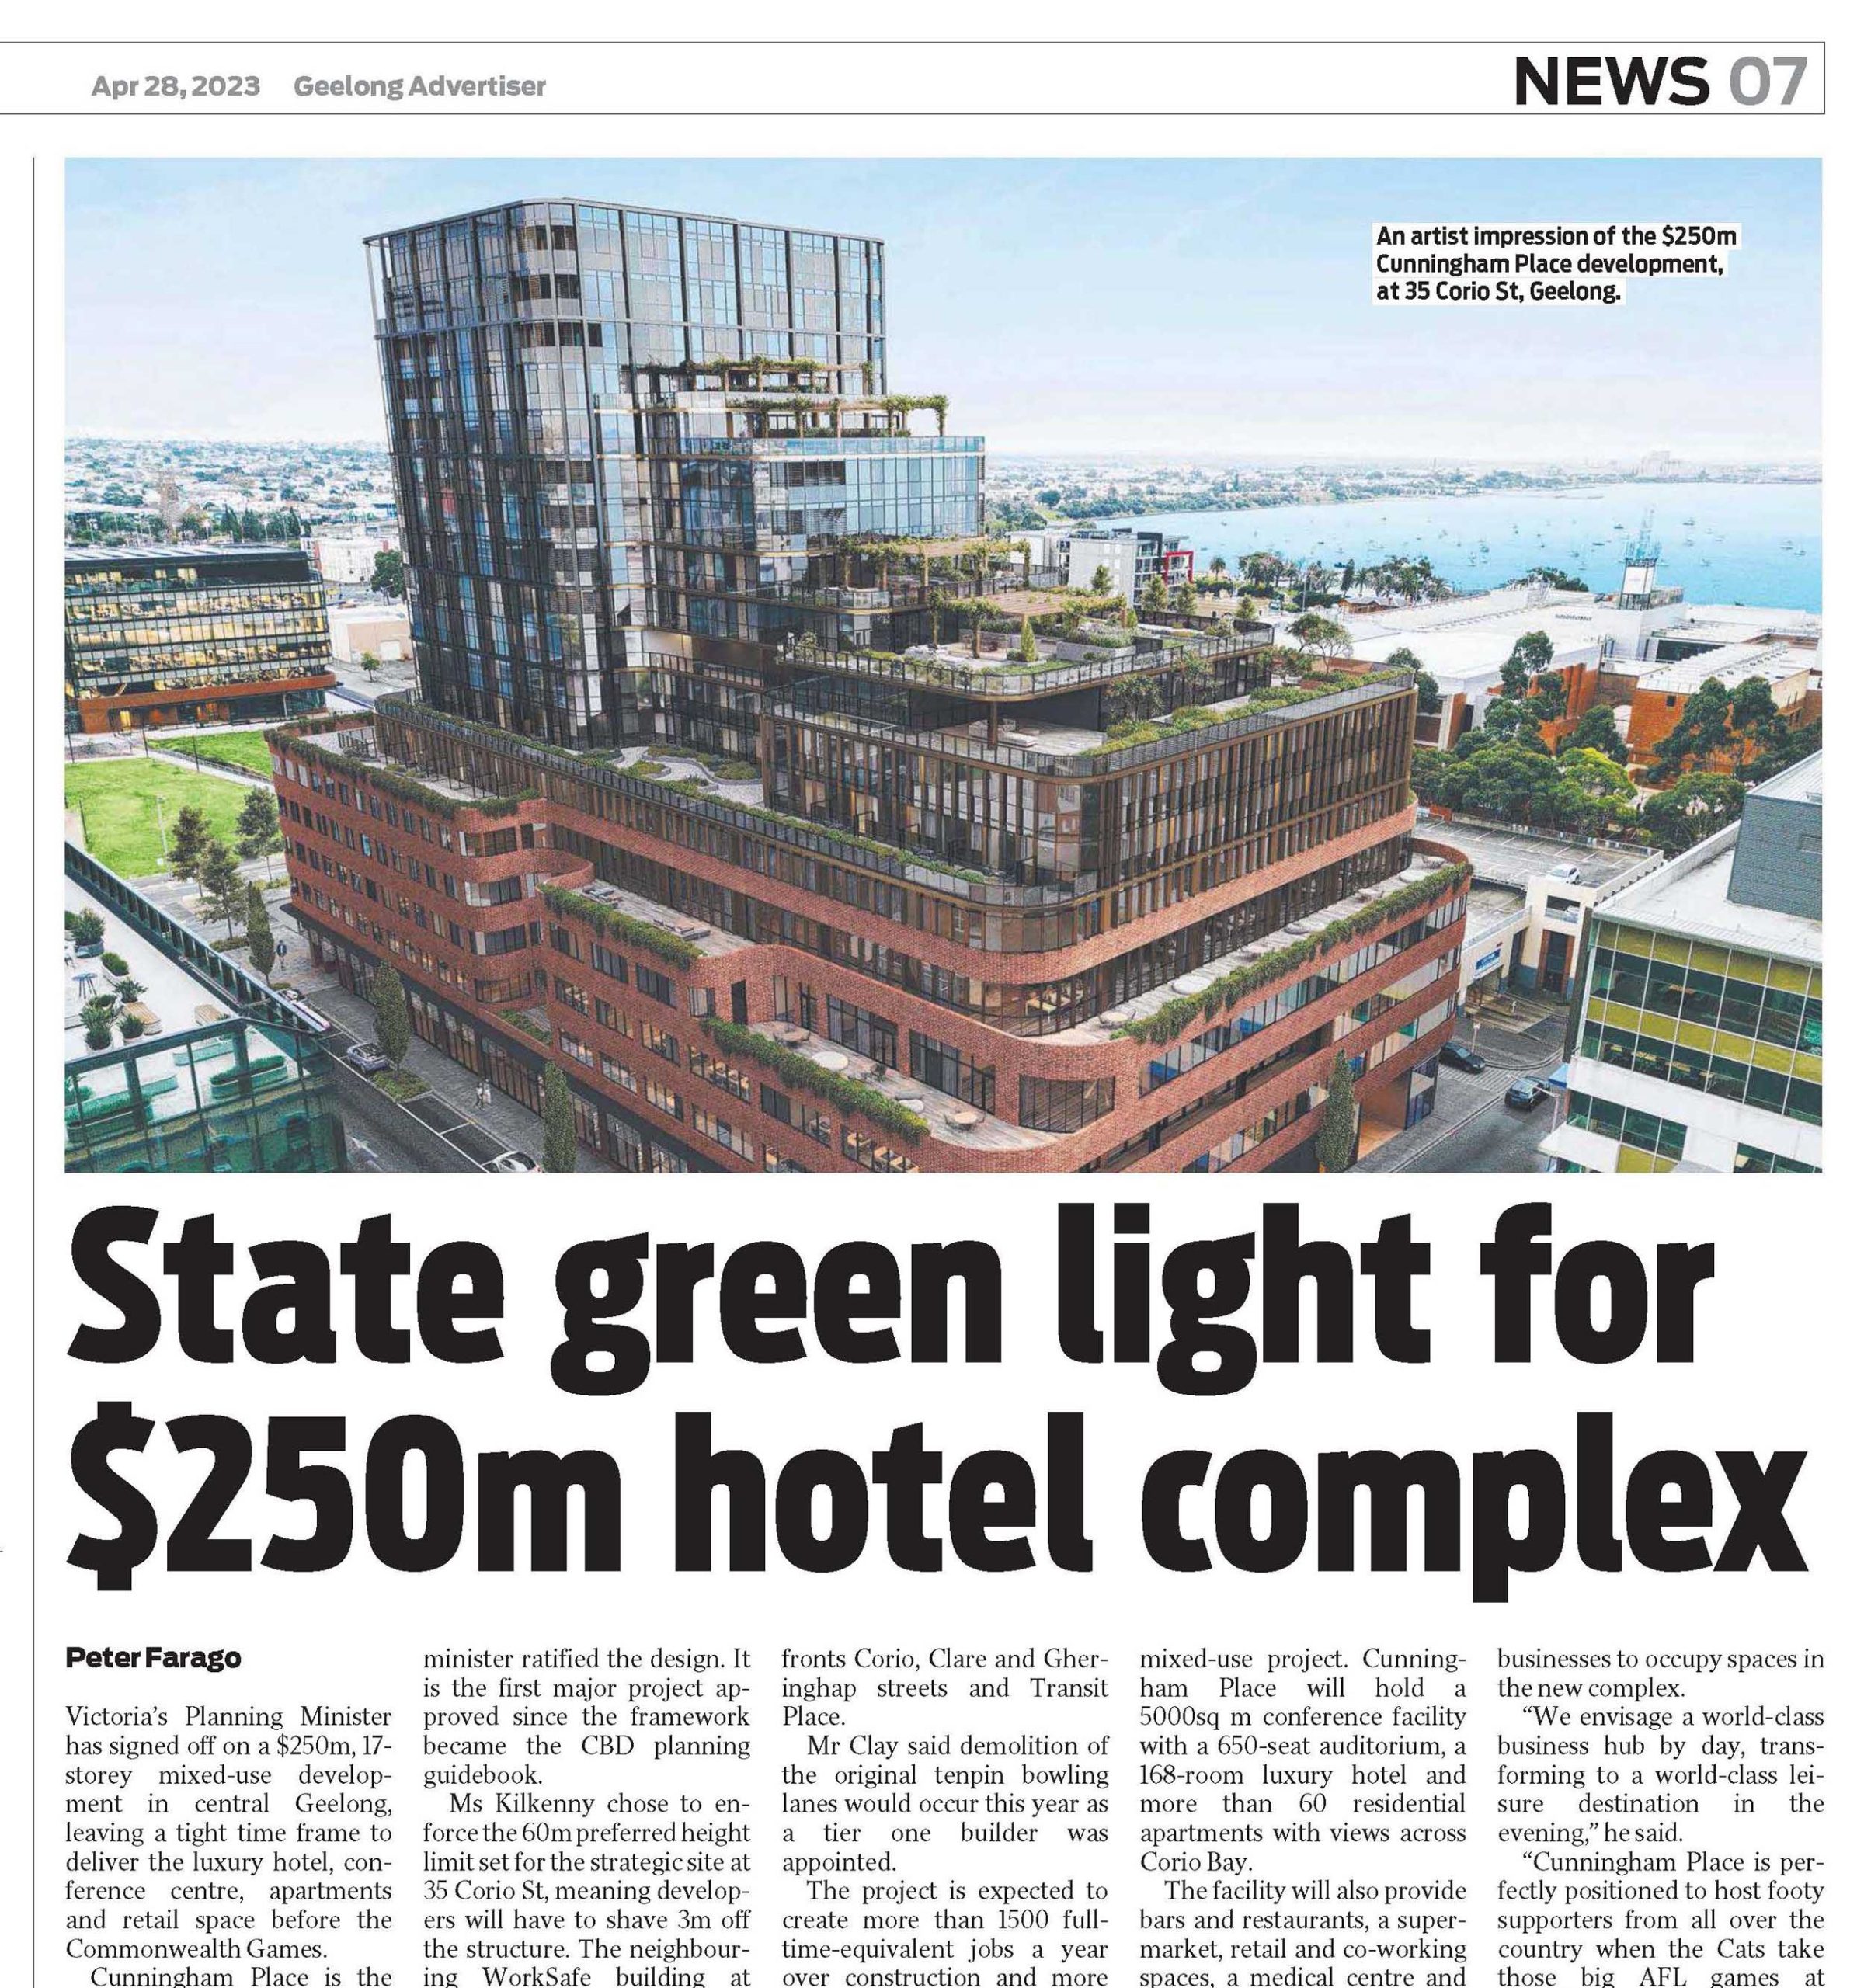 State green light for $250m hotel complex